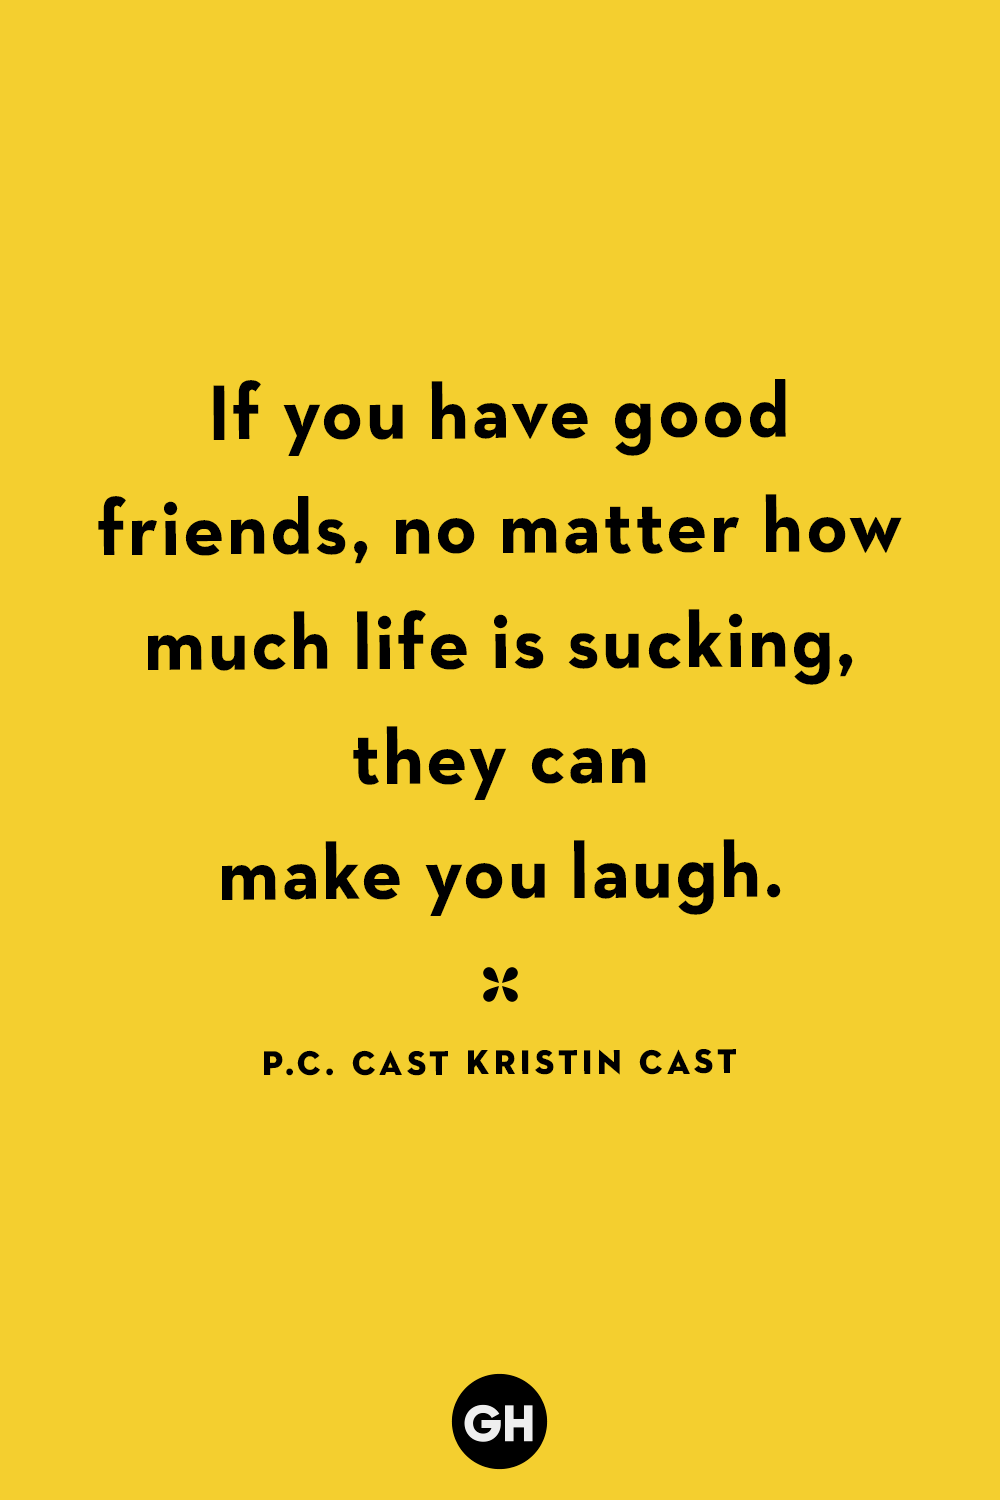 best friend quotes that will make you cry